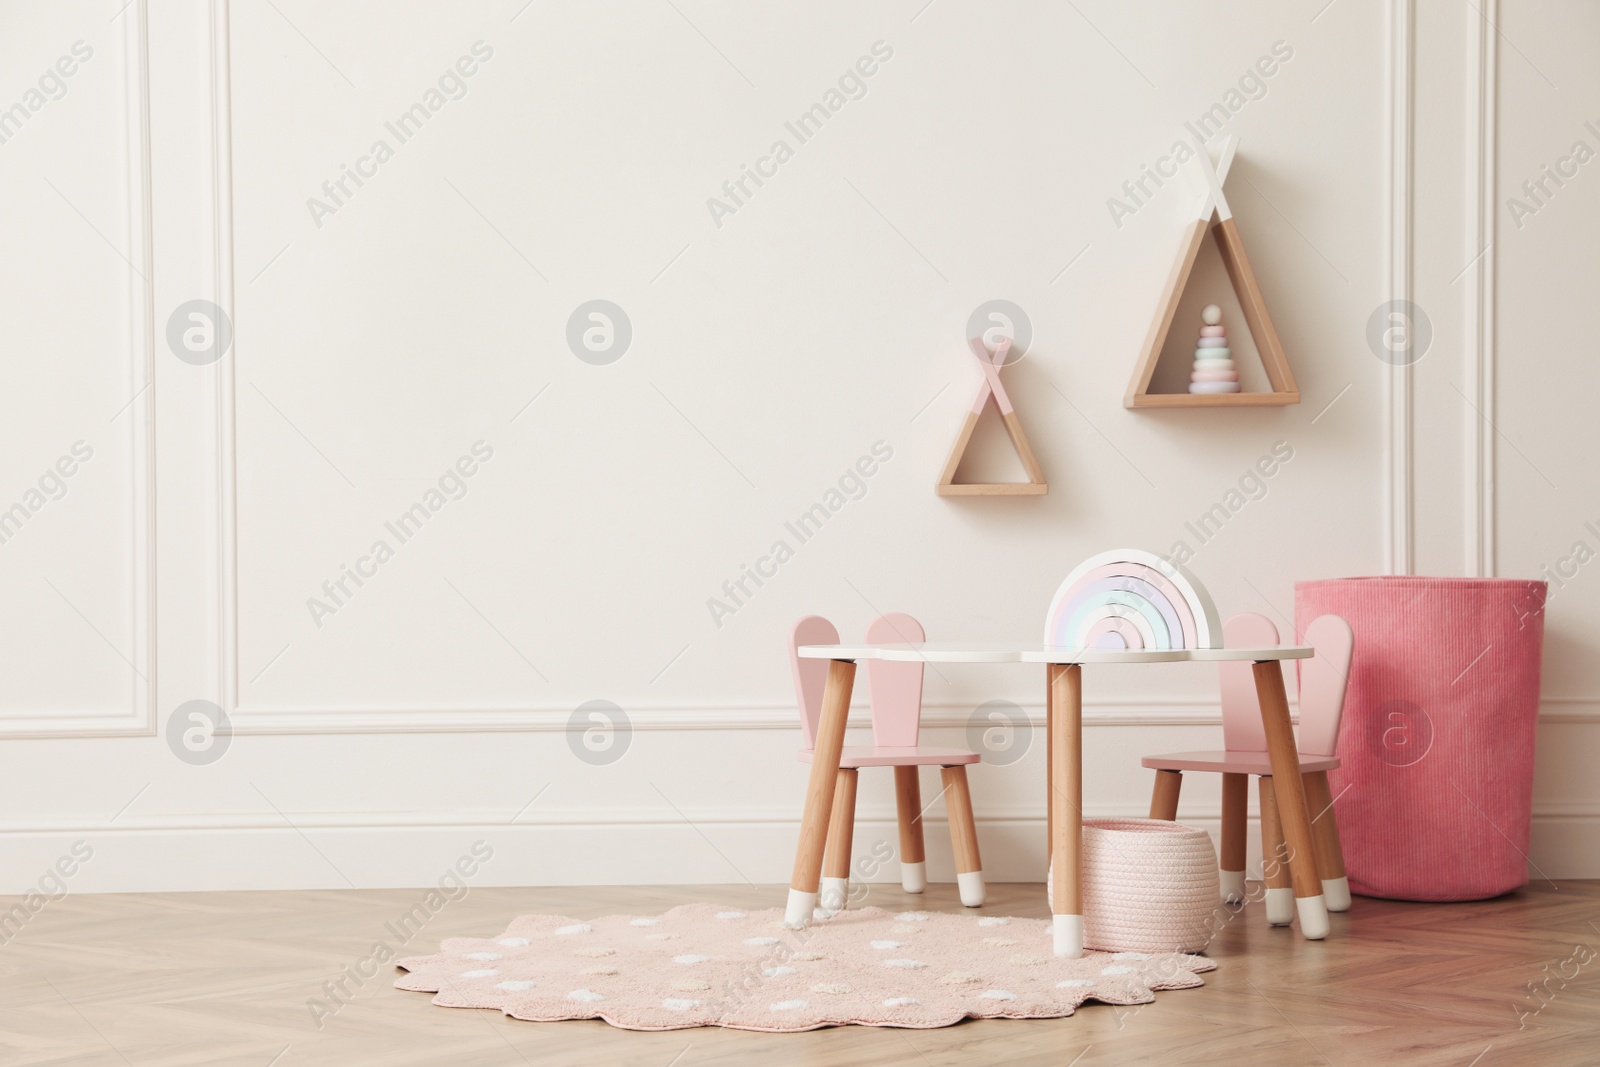 Photo of Cute child room interior with furniture, toys and wigwam shaped shelves on white wall. Space for text